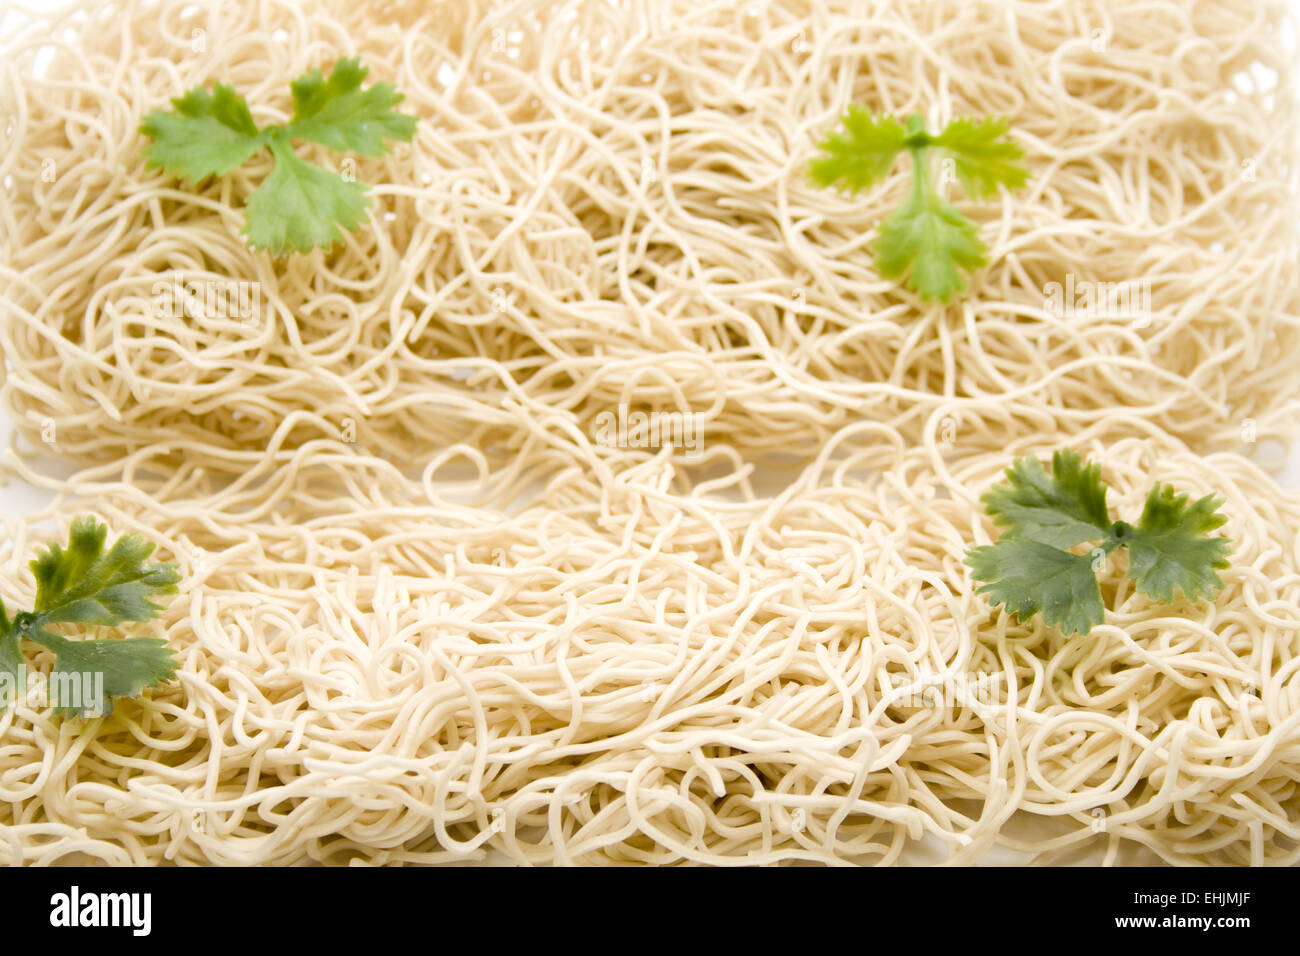 Thread noodle with parsley Stock Photo